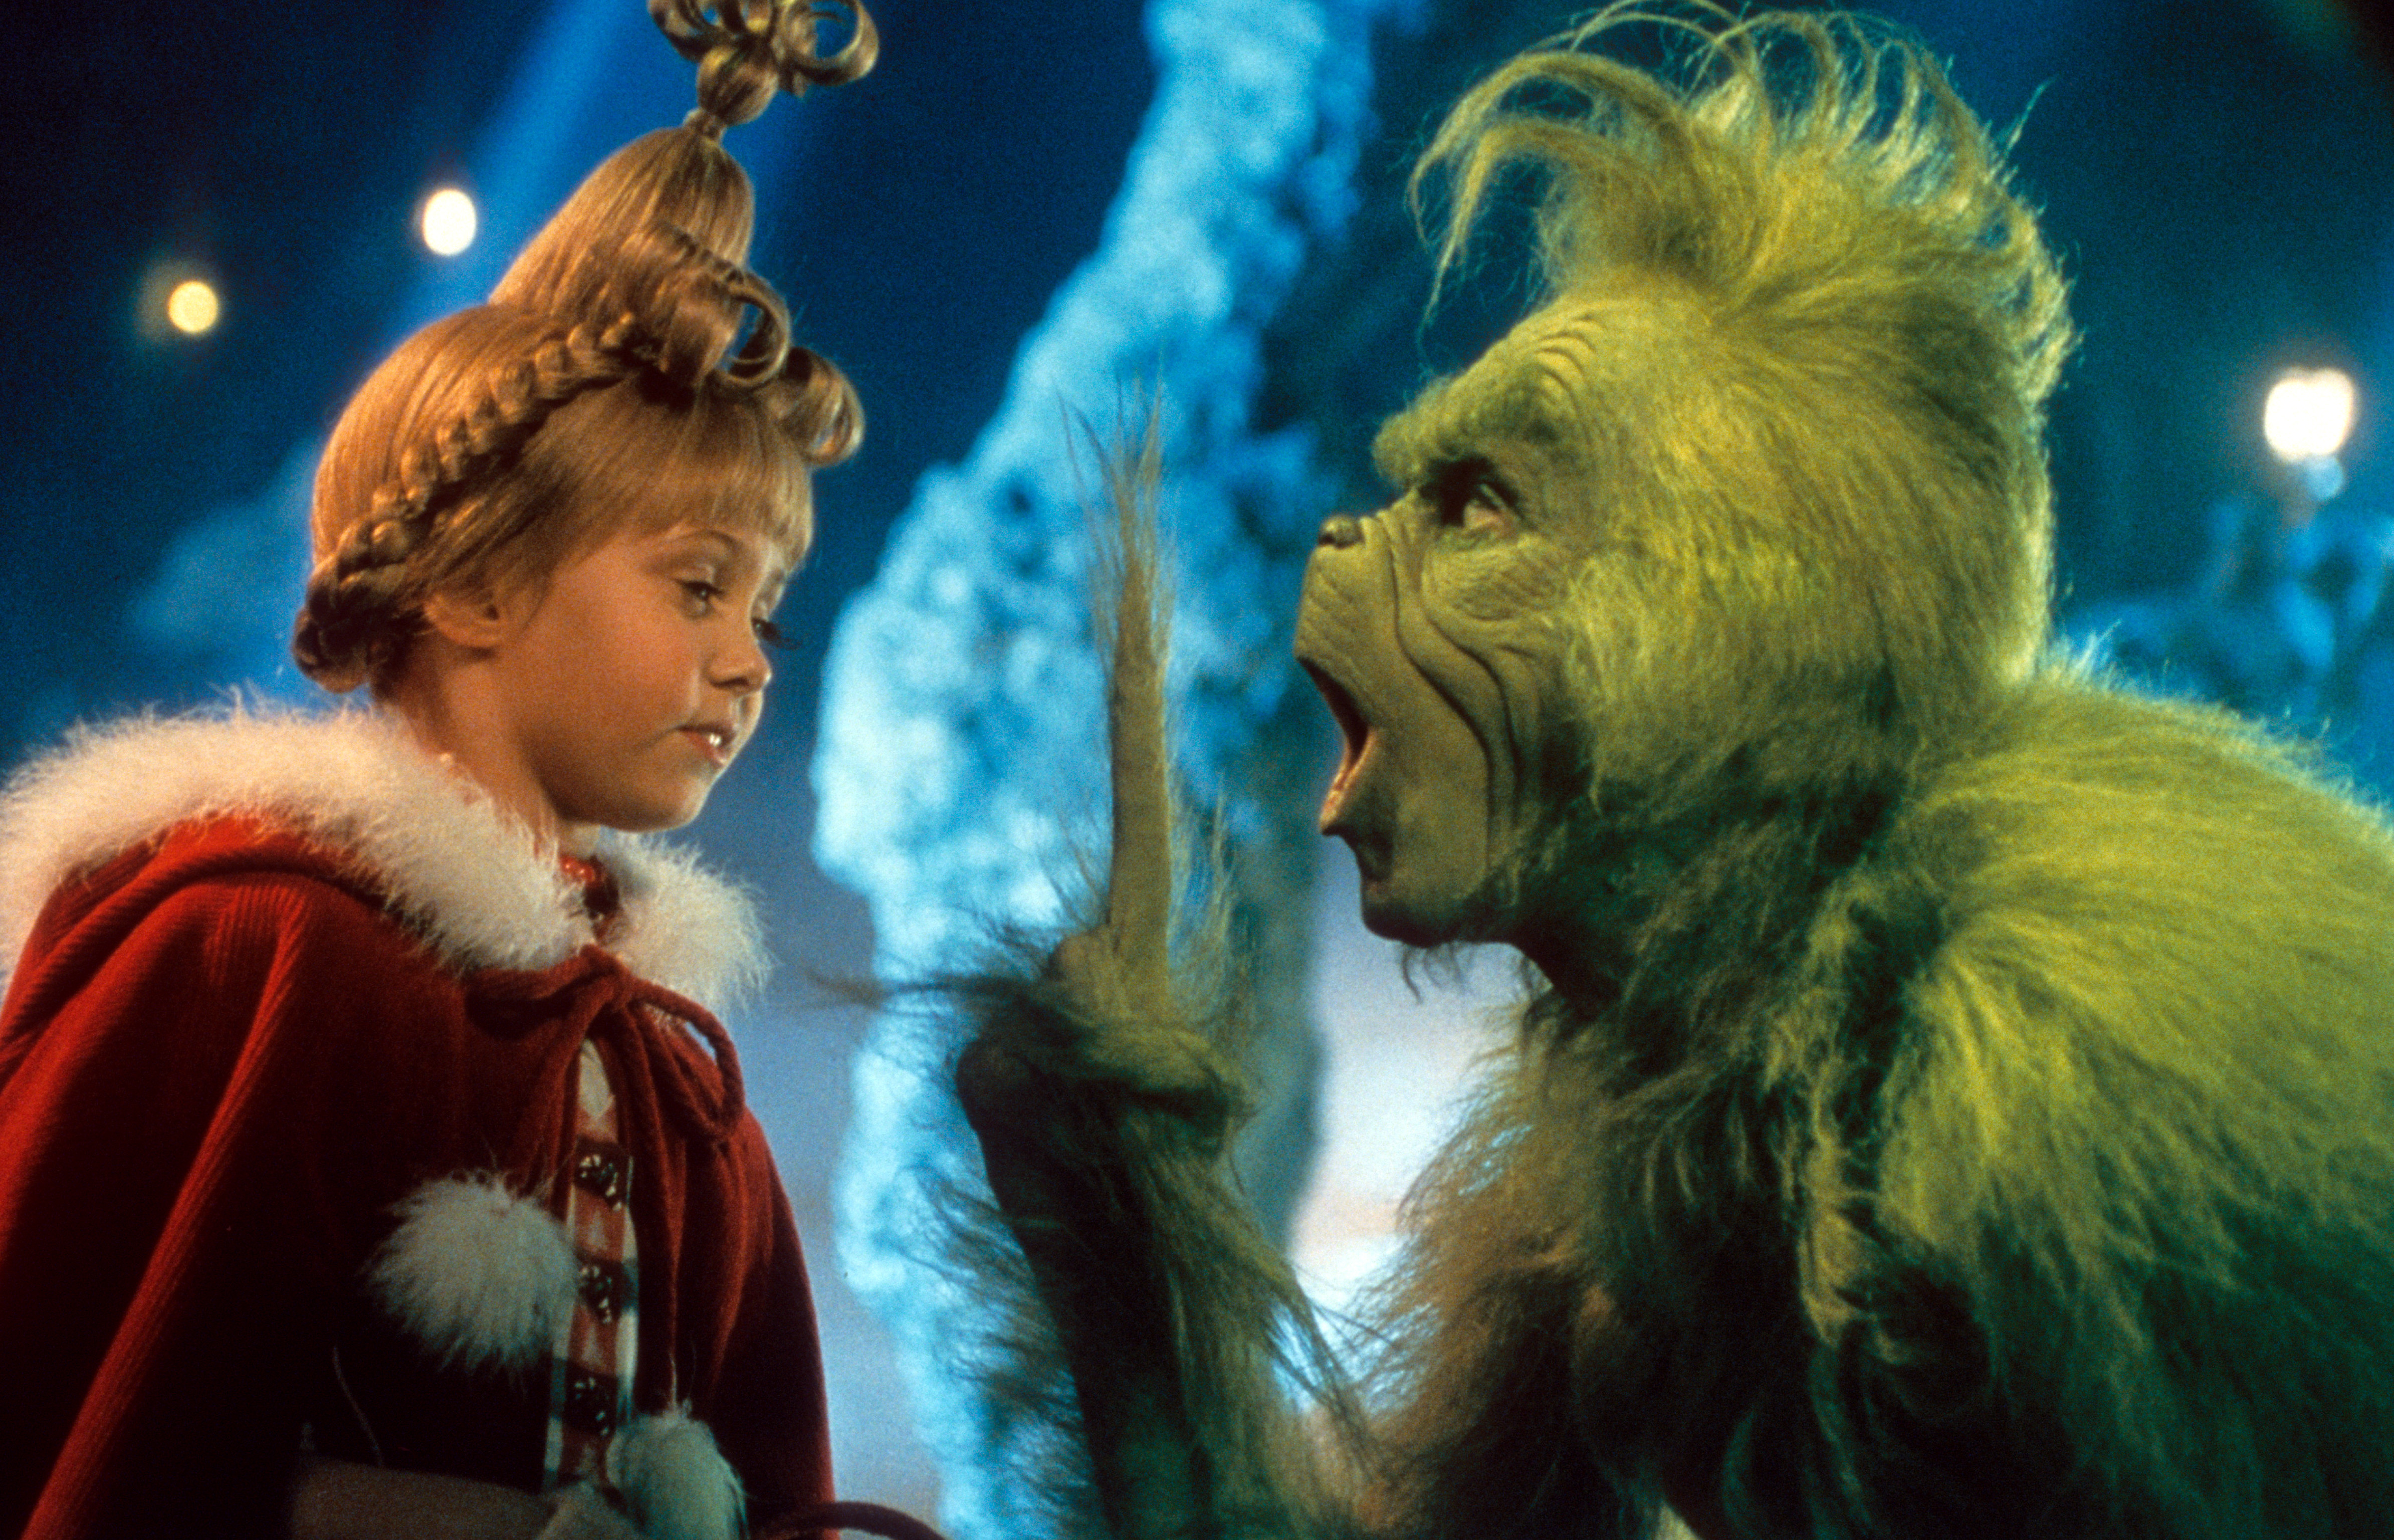 Taylor Momsen and Jim Carrey in the set of "How The Grinch Stole Christmas," 2000.